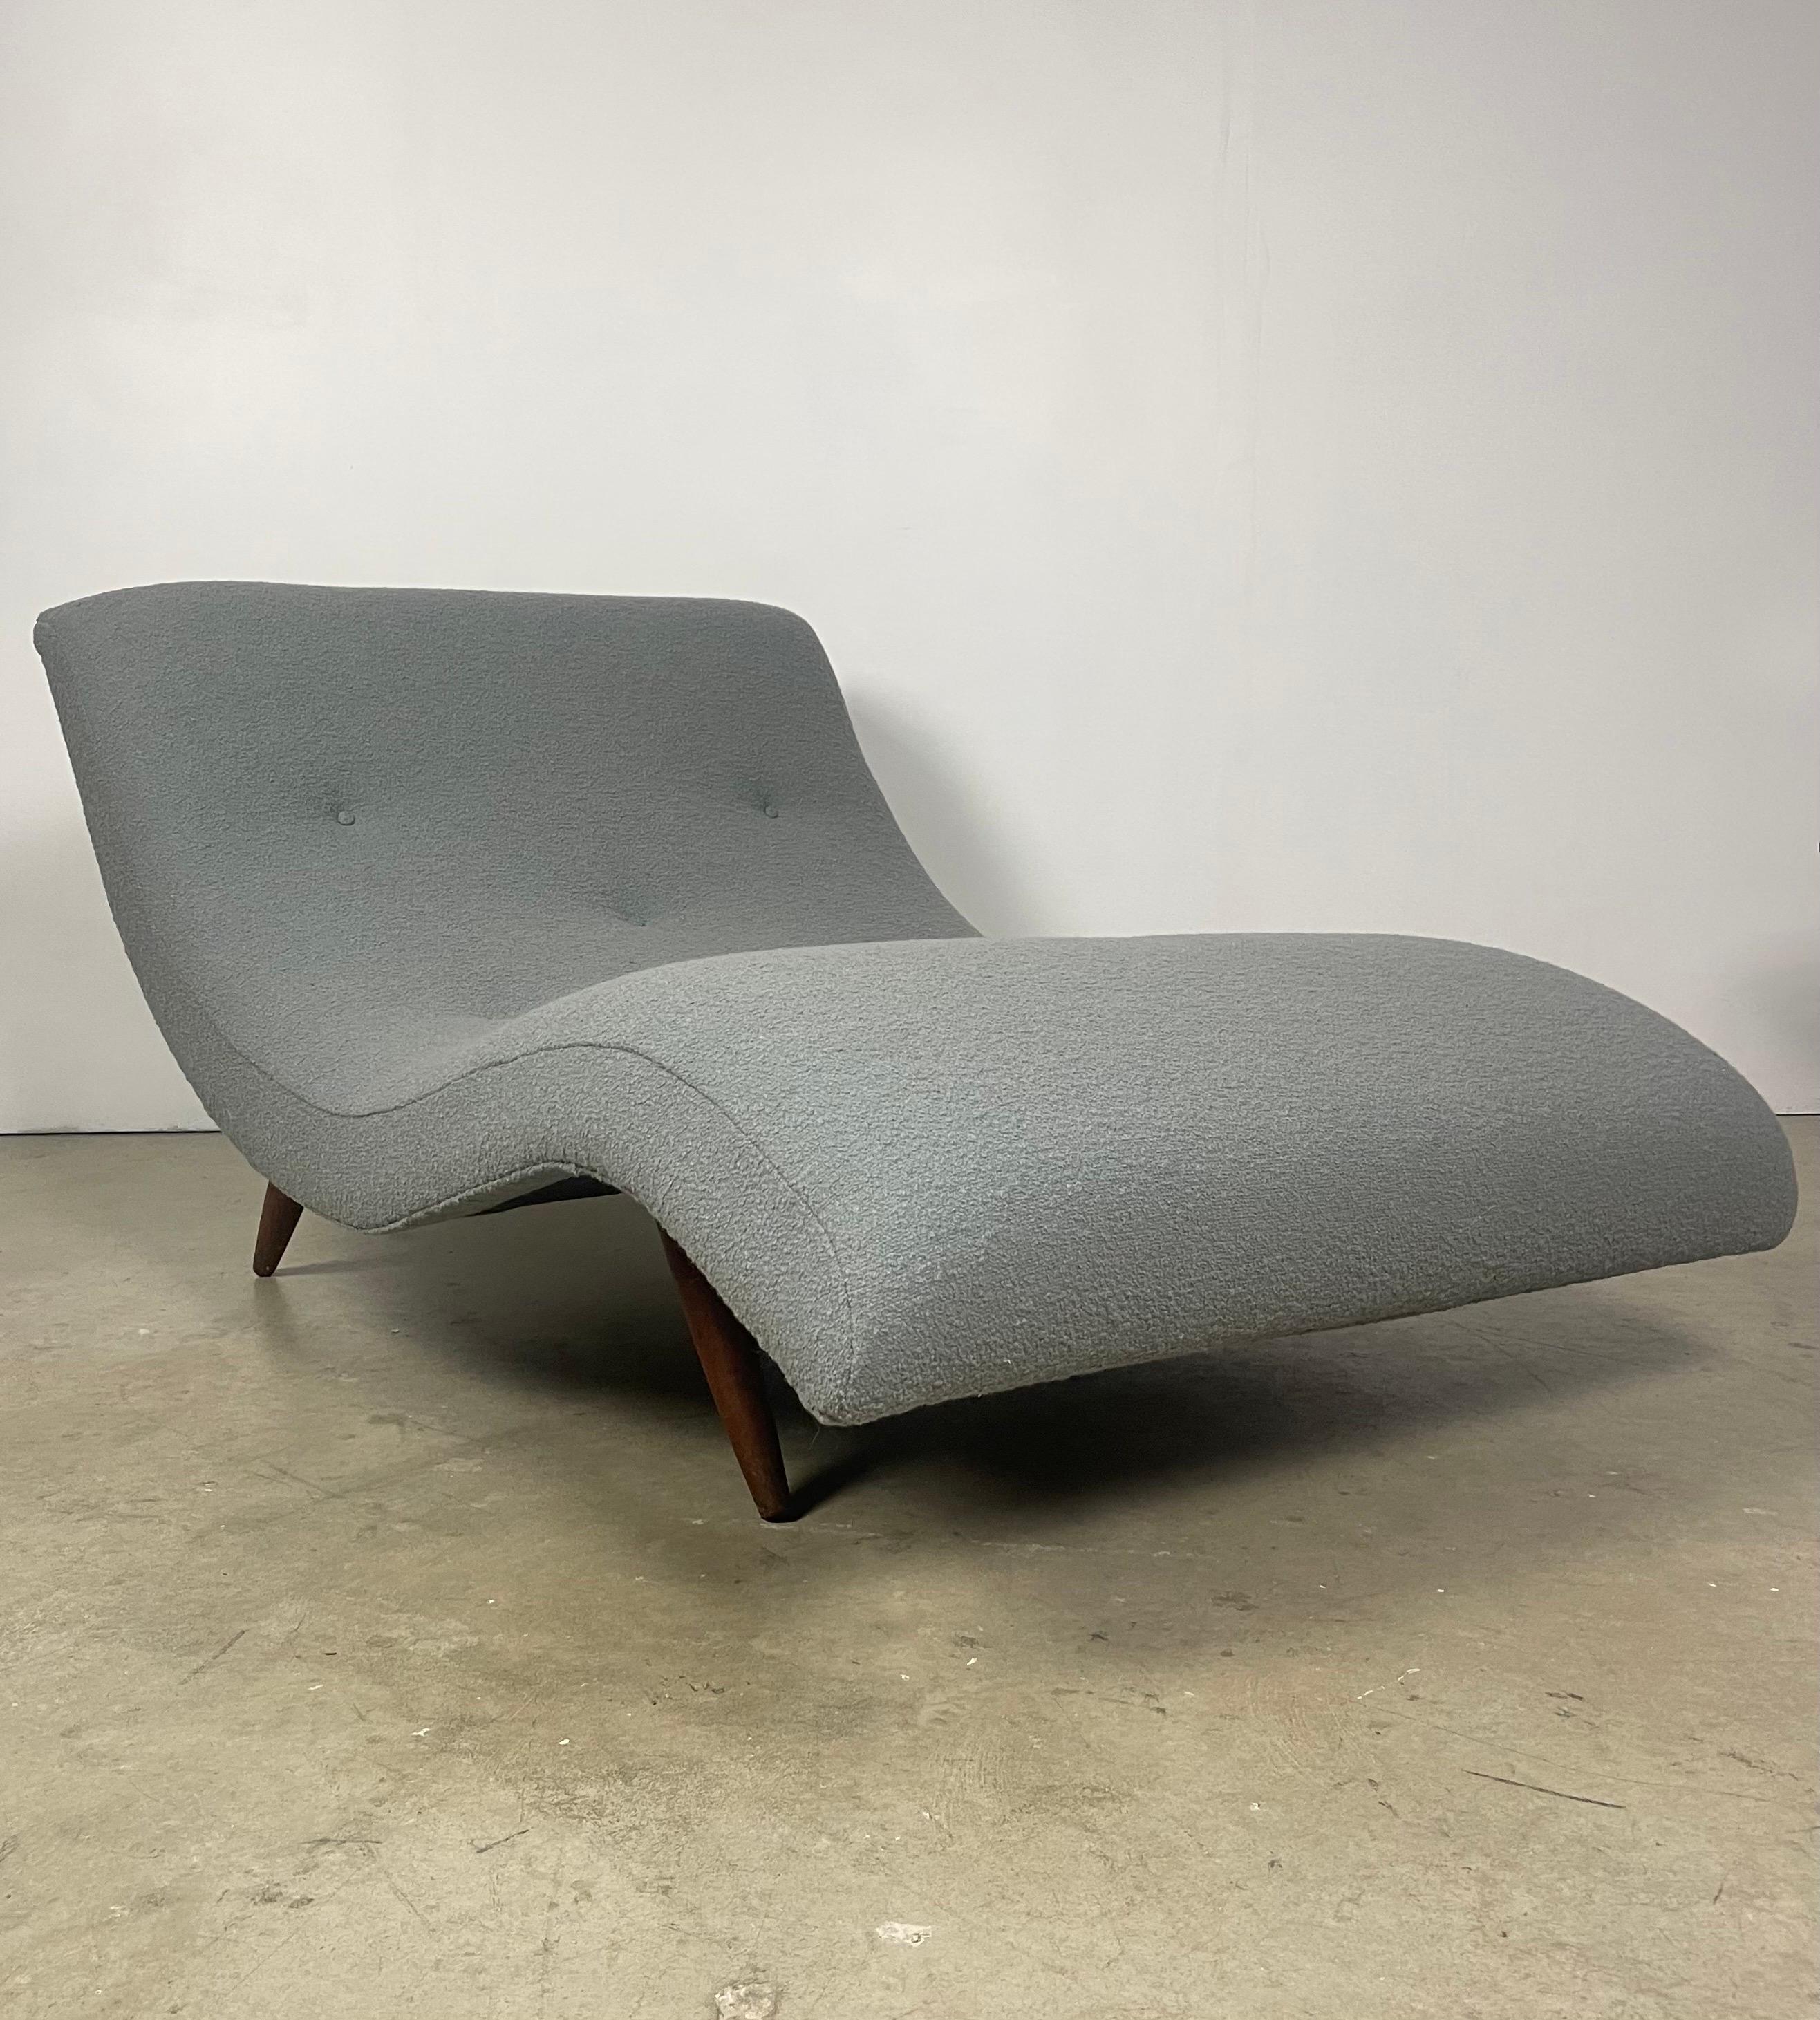 
This vintage Adrian Pearsall chaise lounge has been expertly restored and reupholstered in Knoll Boucle, a luxurious and durable fabric. The curved design of the chaise offers ultimate comfort and relaxation, while the sturdy wooden frame provides